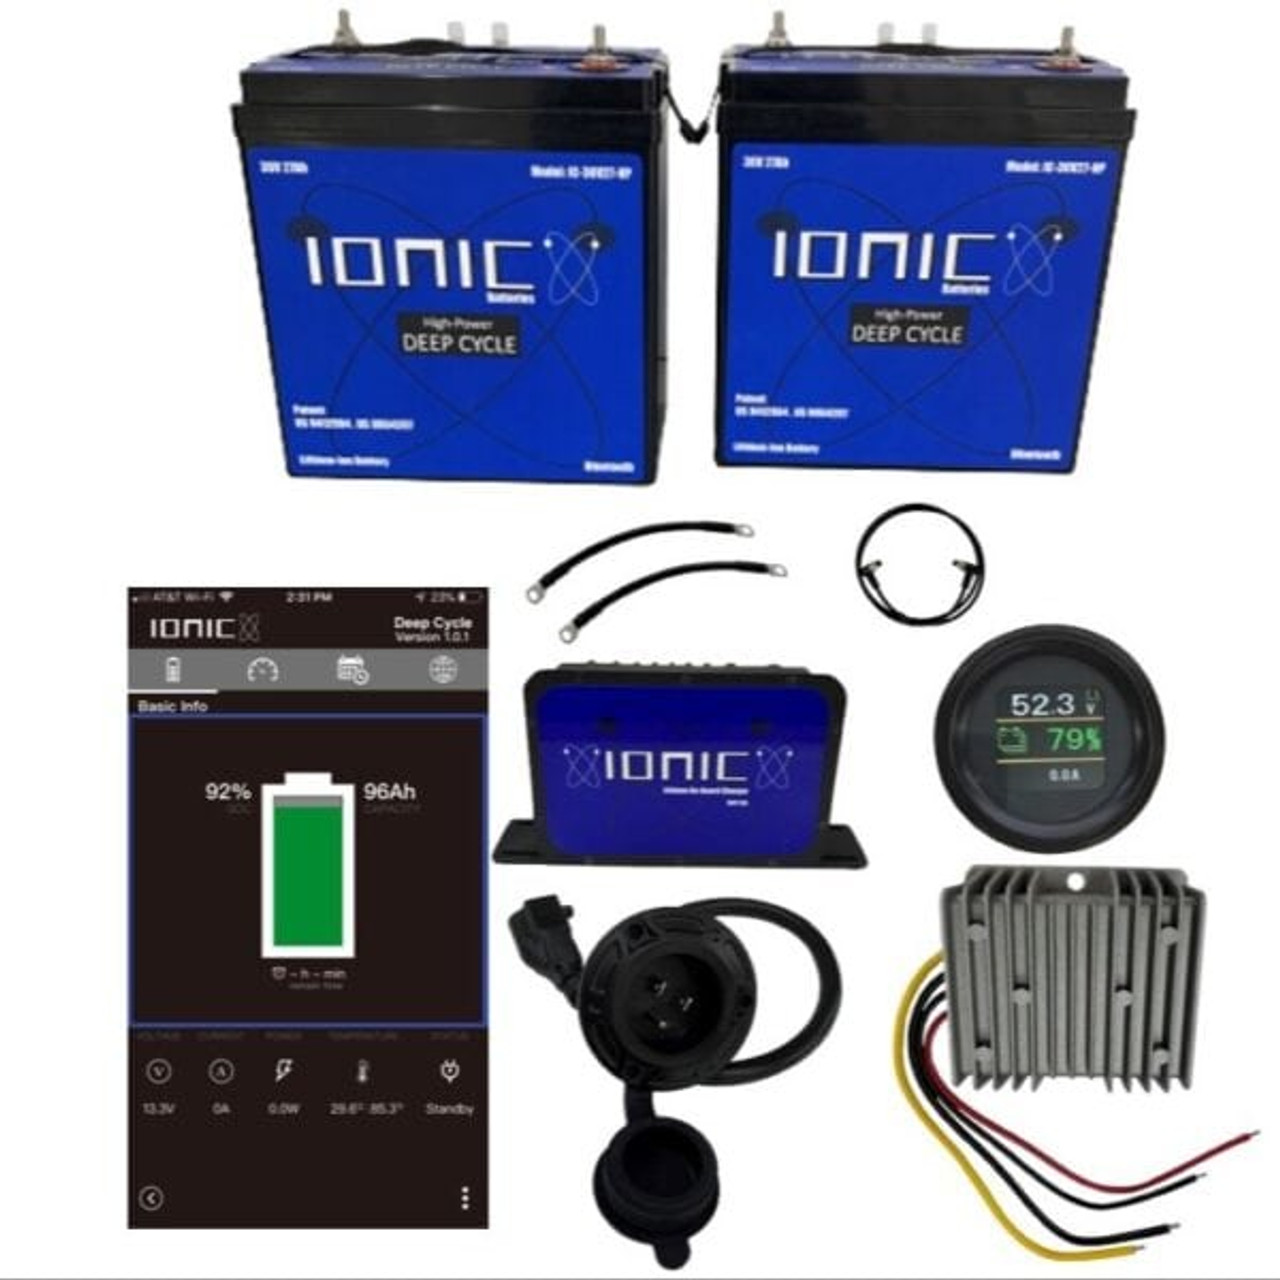 TWO – Ionic Lithium 36V 27Ah | Golf Cart LiFePO4 Deep Cycle Battery + Bluetooth
ONE – Ionic Lithium LiFePO4 36V 12A Charger
ONE – IONIC Battery Monitor CAN
ONE – Golf Cart Battery Voltage Converter 36V
ONE – Battery CAN Cable
TWO – 12in 4AWG Battery Cable
FREE – 120V Plug Adapter